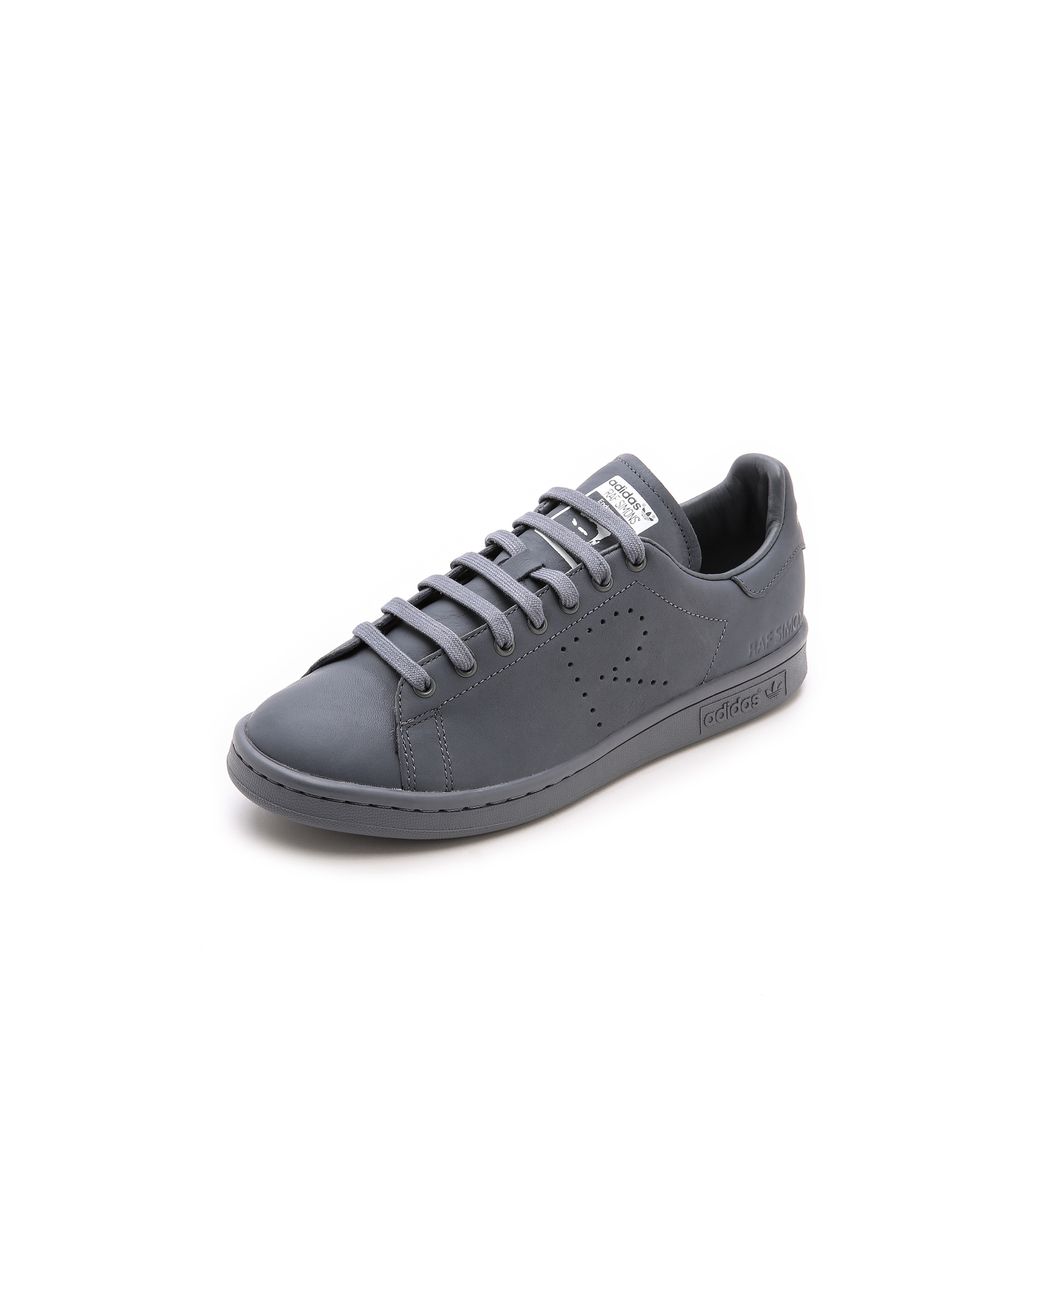 adidas By Raf Simons Stan Smith Leather Sneakers in Grey | Lyst Canada